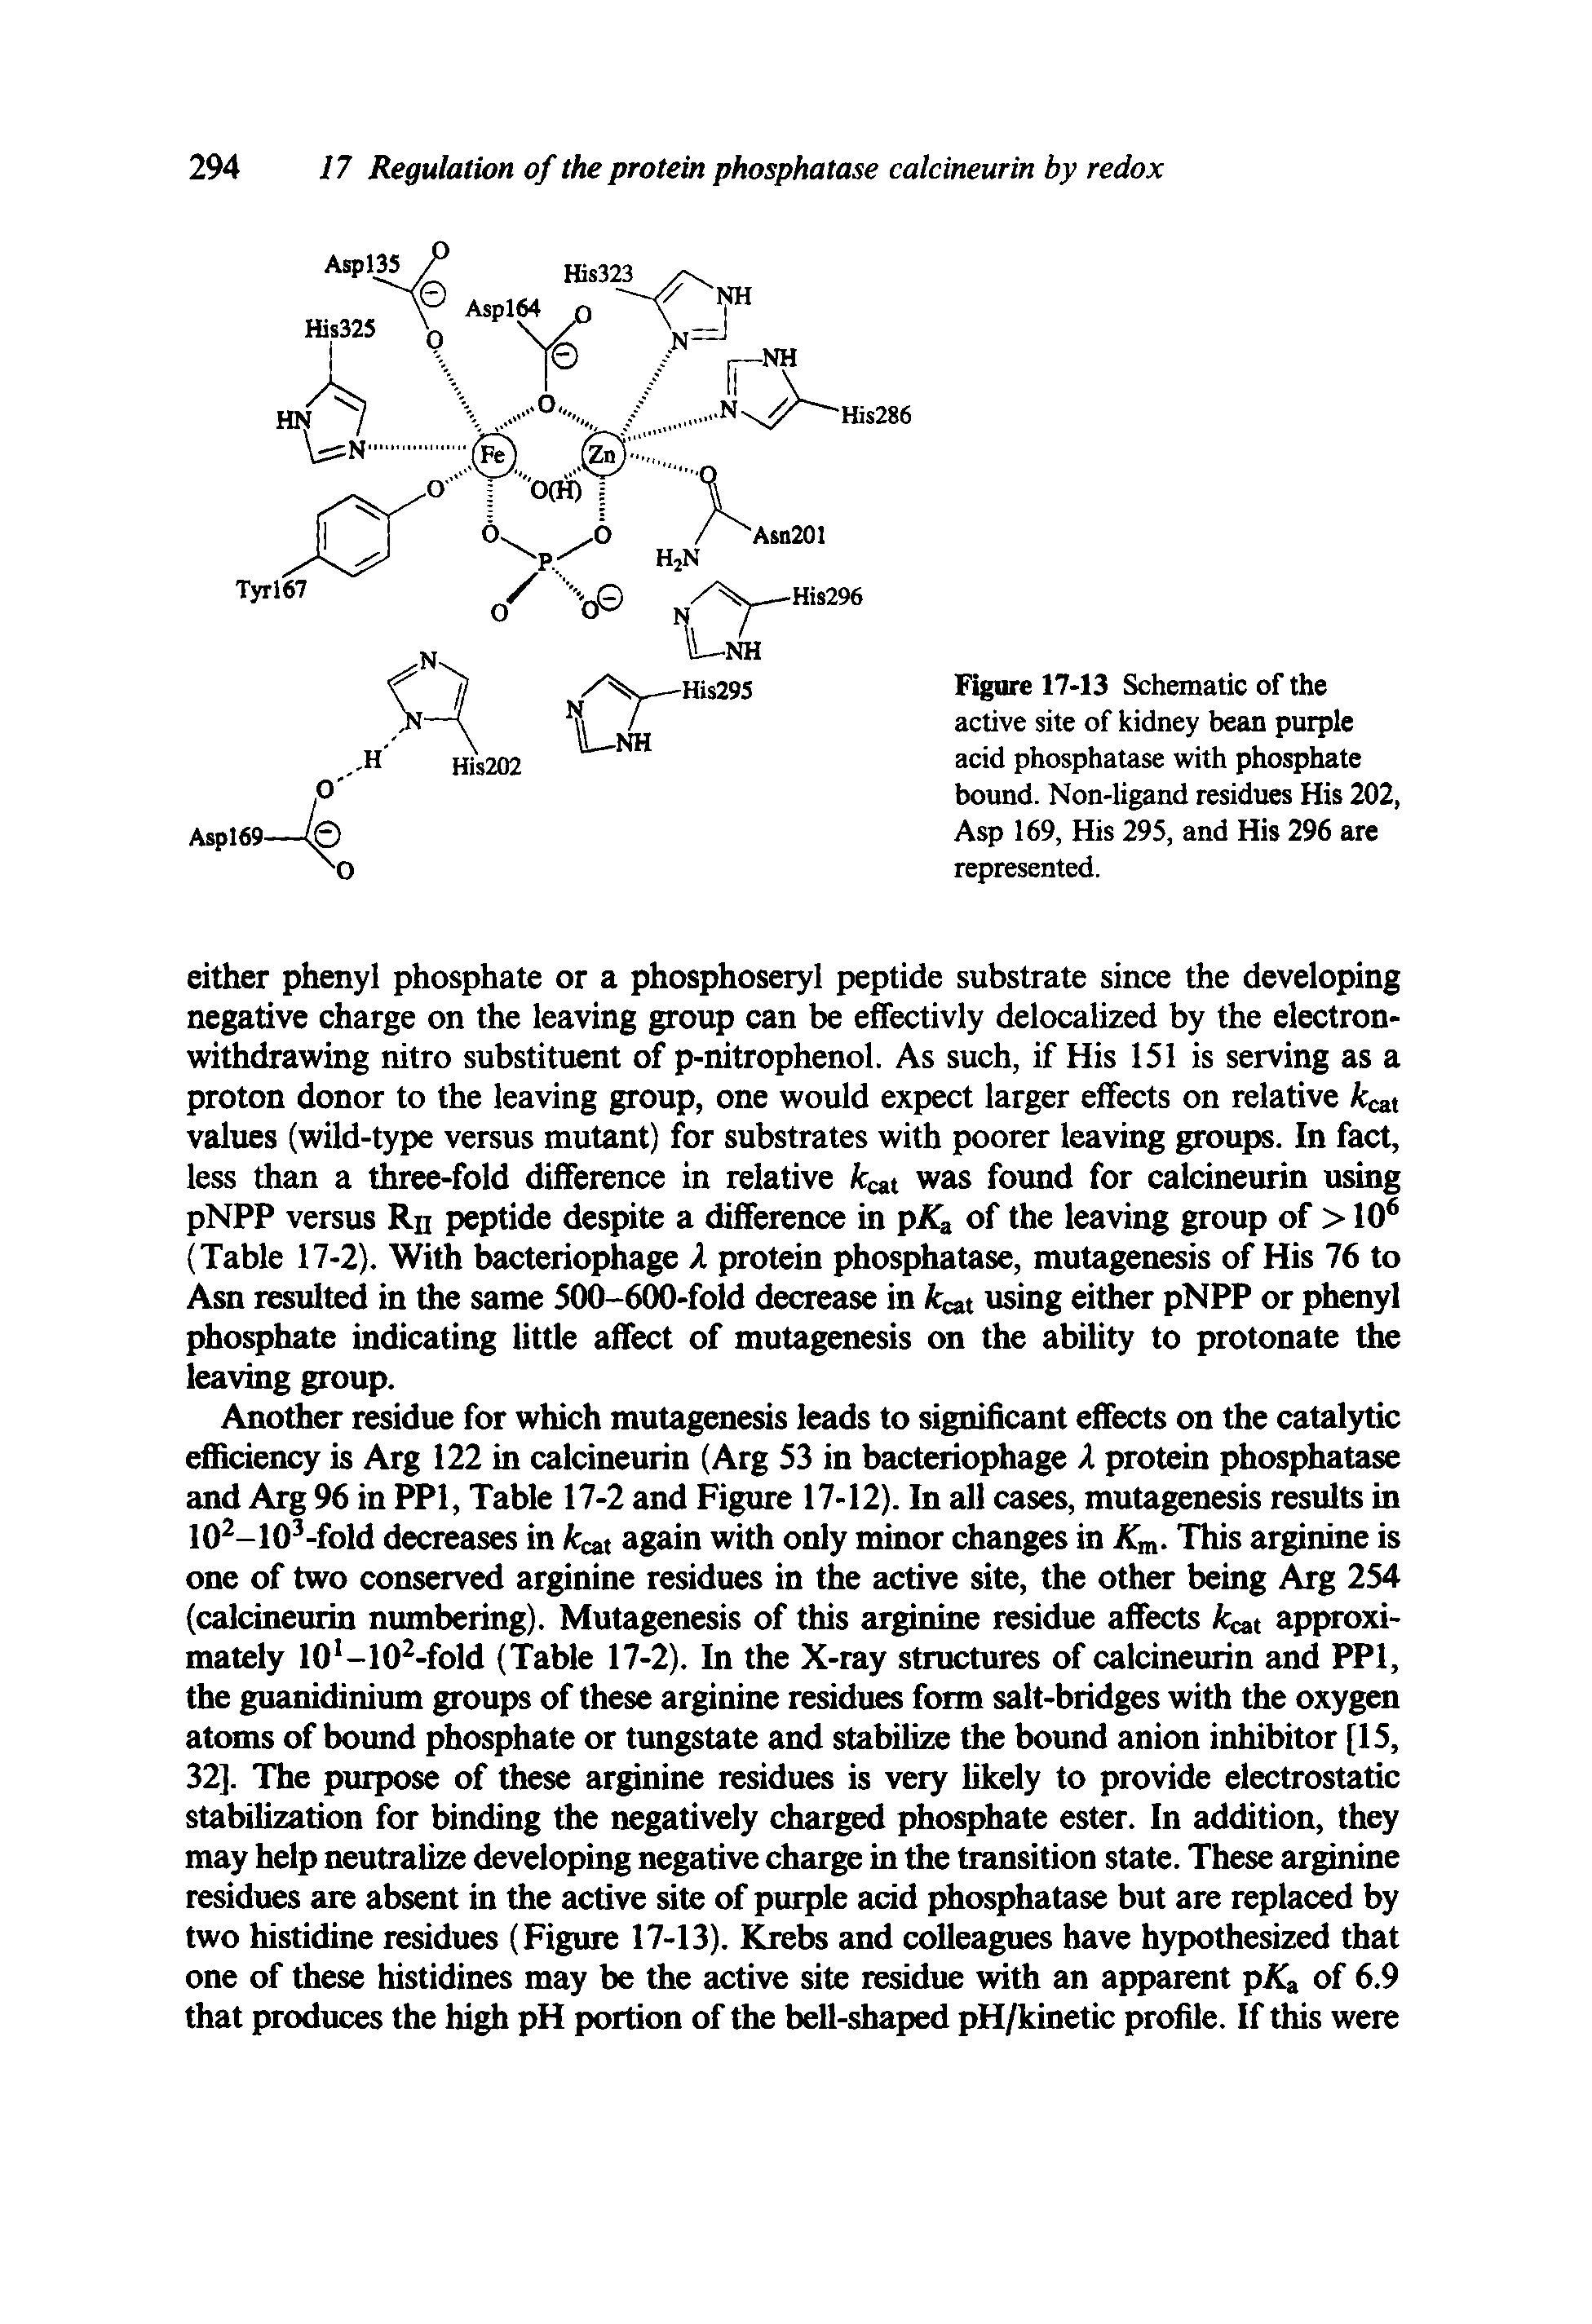 Figure 17-13 Schematic of the active site of kidney bean purple acid phosphatase with phosphate bound. Non-ligand residues His 202, Asp 169, His 295, and His 296 are represented.